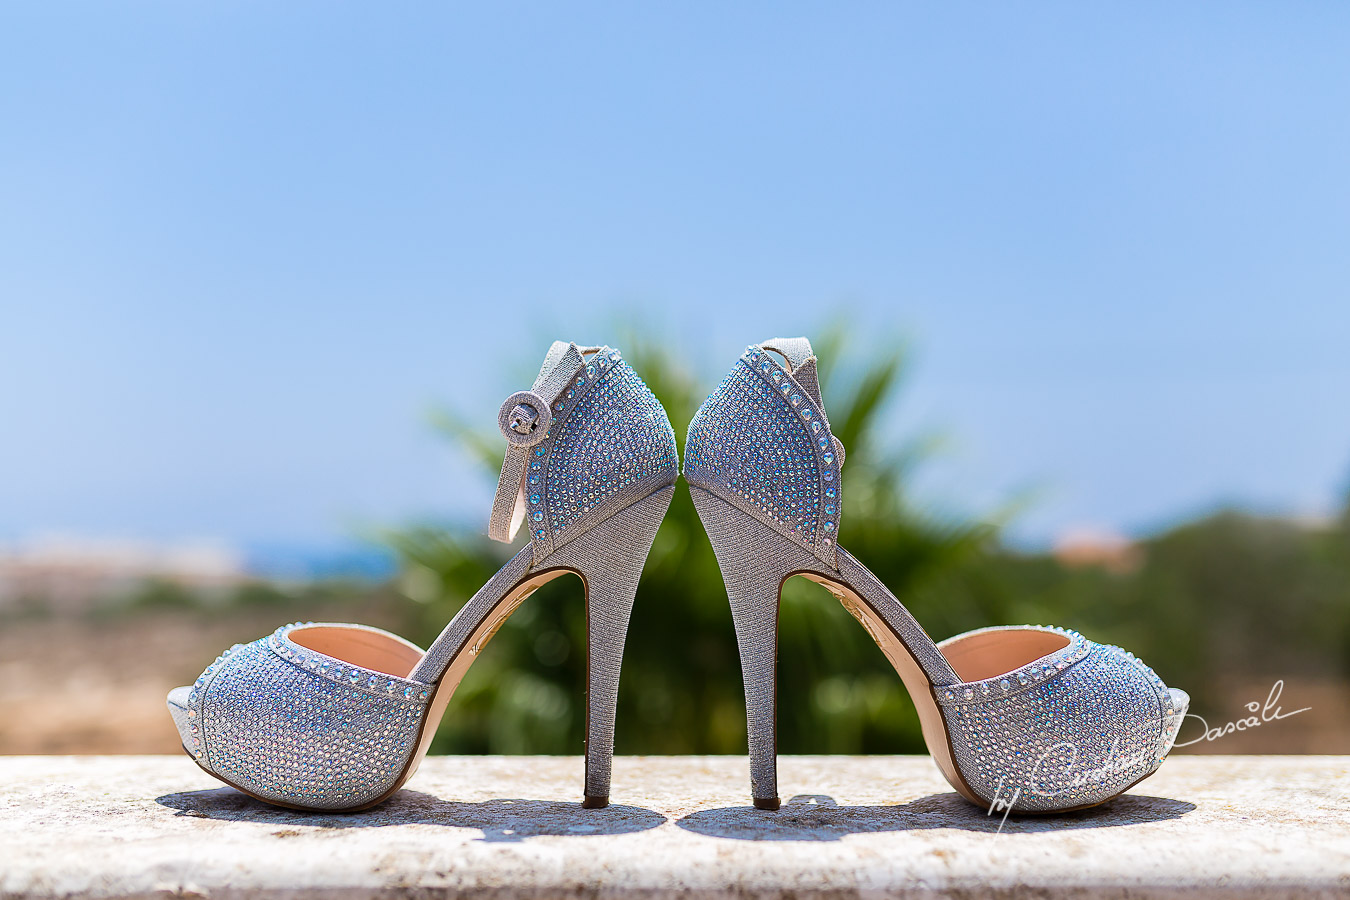 Wedding detailsEverlasting Wedding Photography in Ayia Napa. Photography by Cristian DascaluEverlasting Wedding Photography in Ayia Napa. Photography by Cristian Dascalu